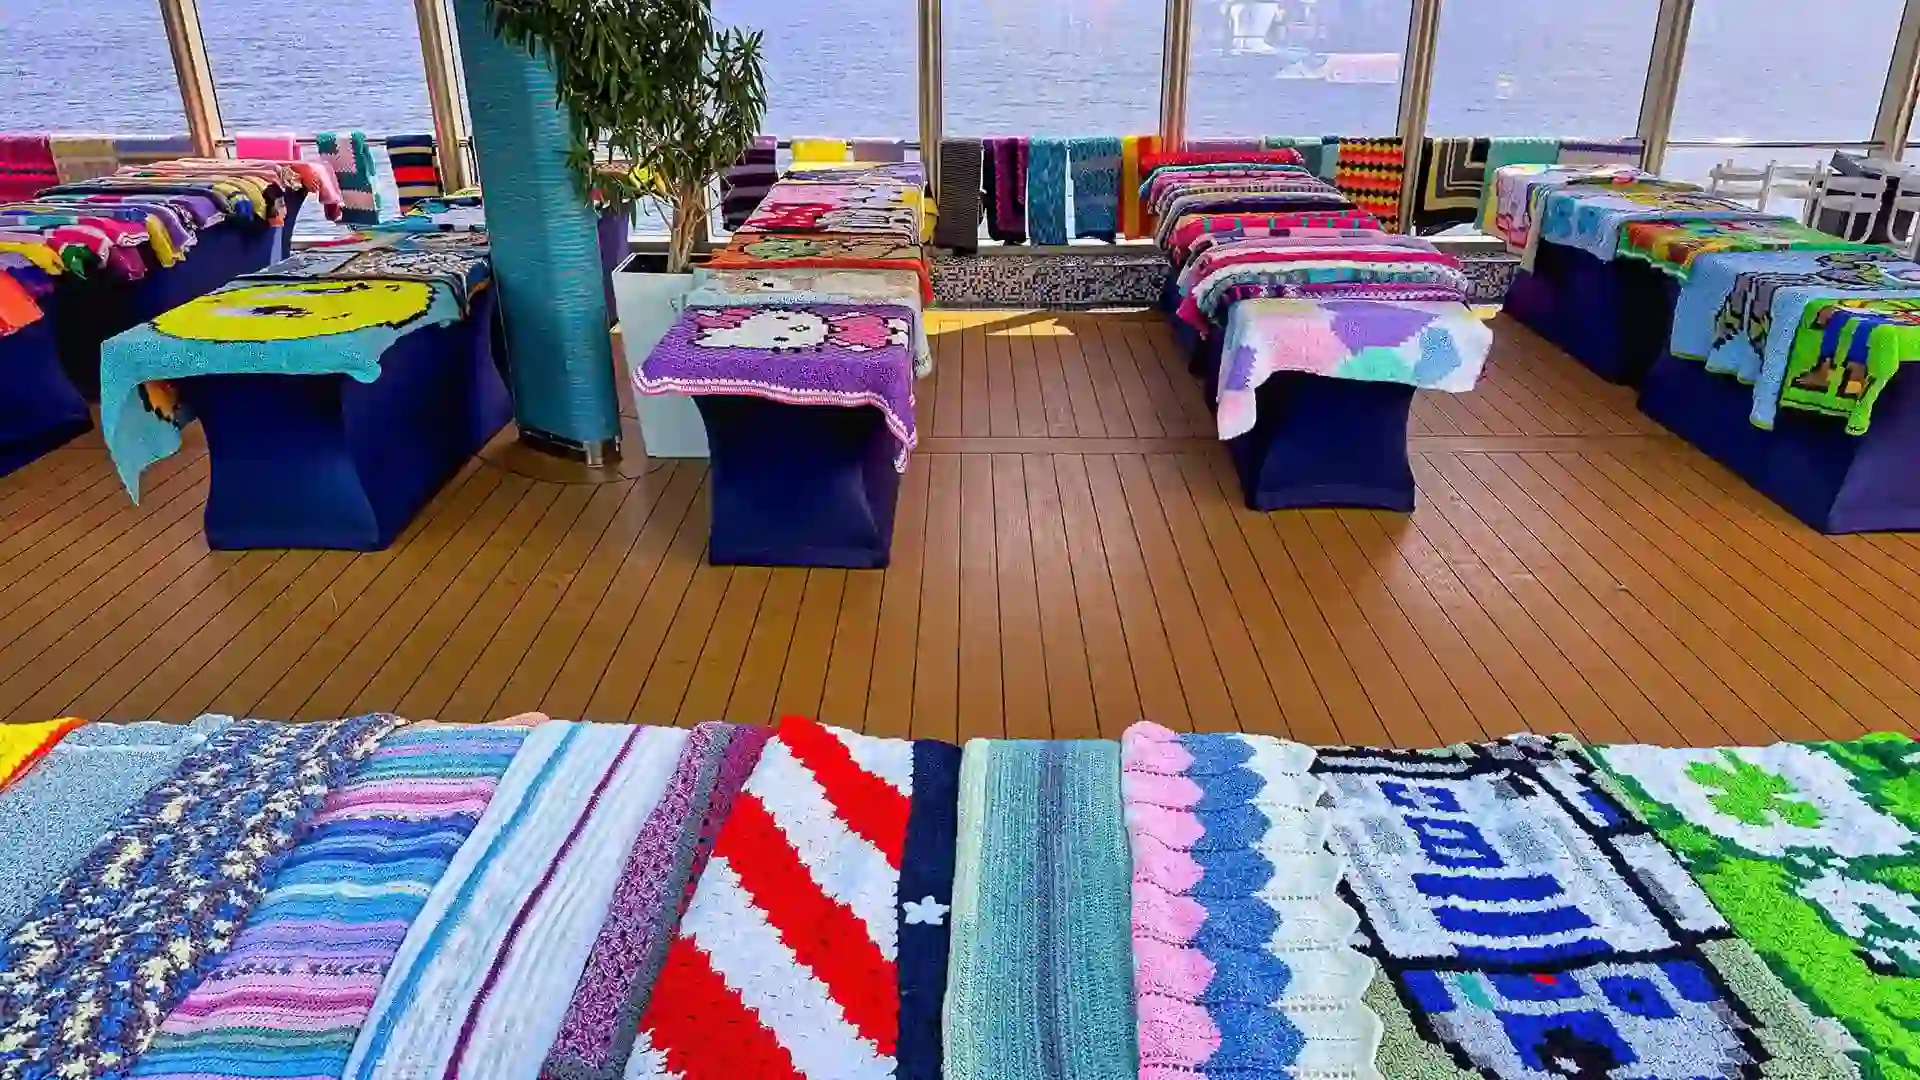 View of multicolored blankets displayed on Holland America Line cruise deck.